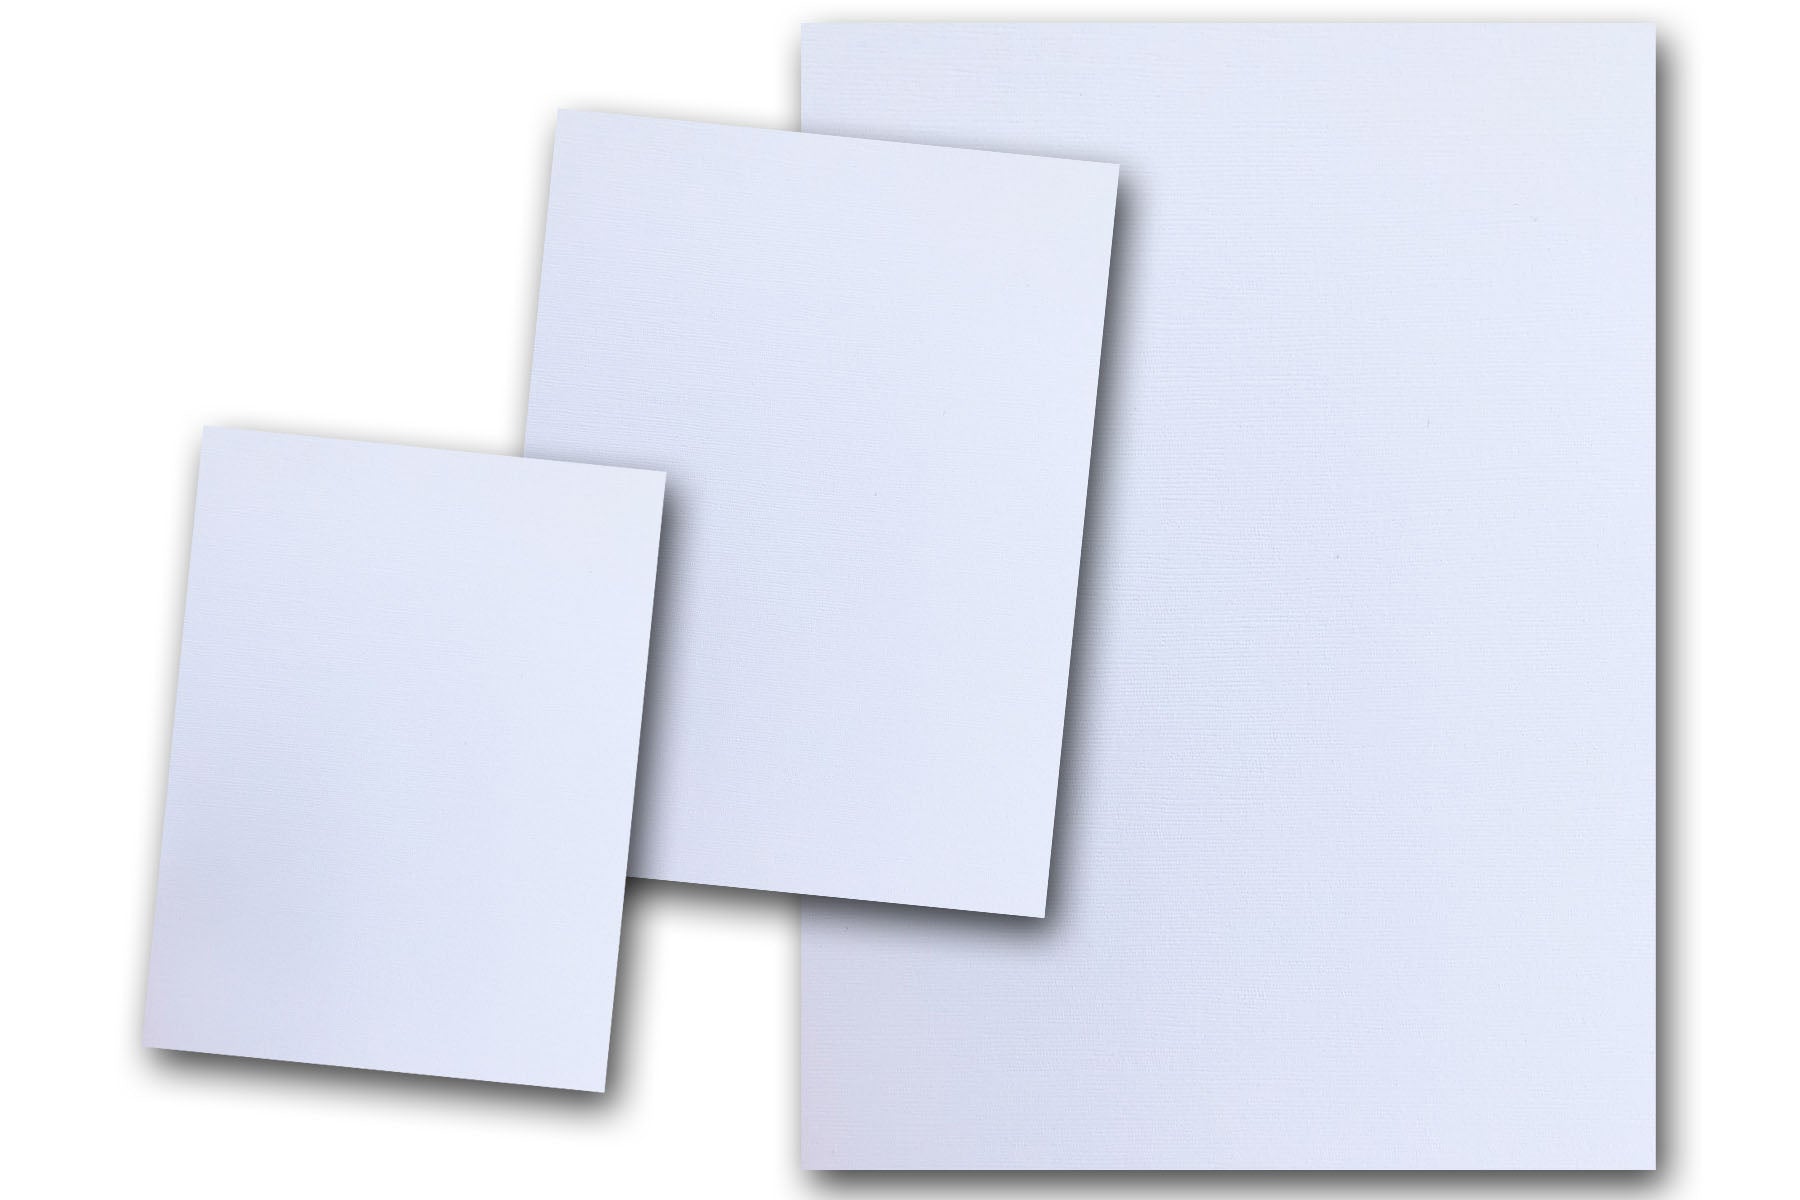 Pop-Tone's Off-White Discount Card Stock for all paper crafting needs -  CutCardStock